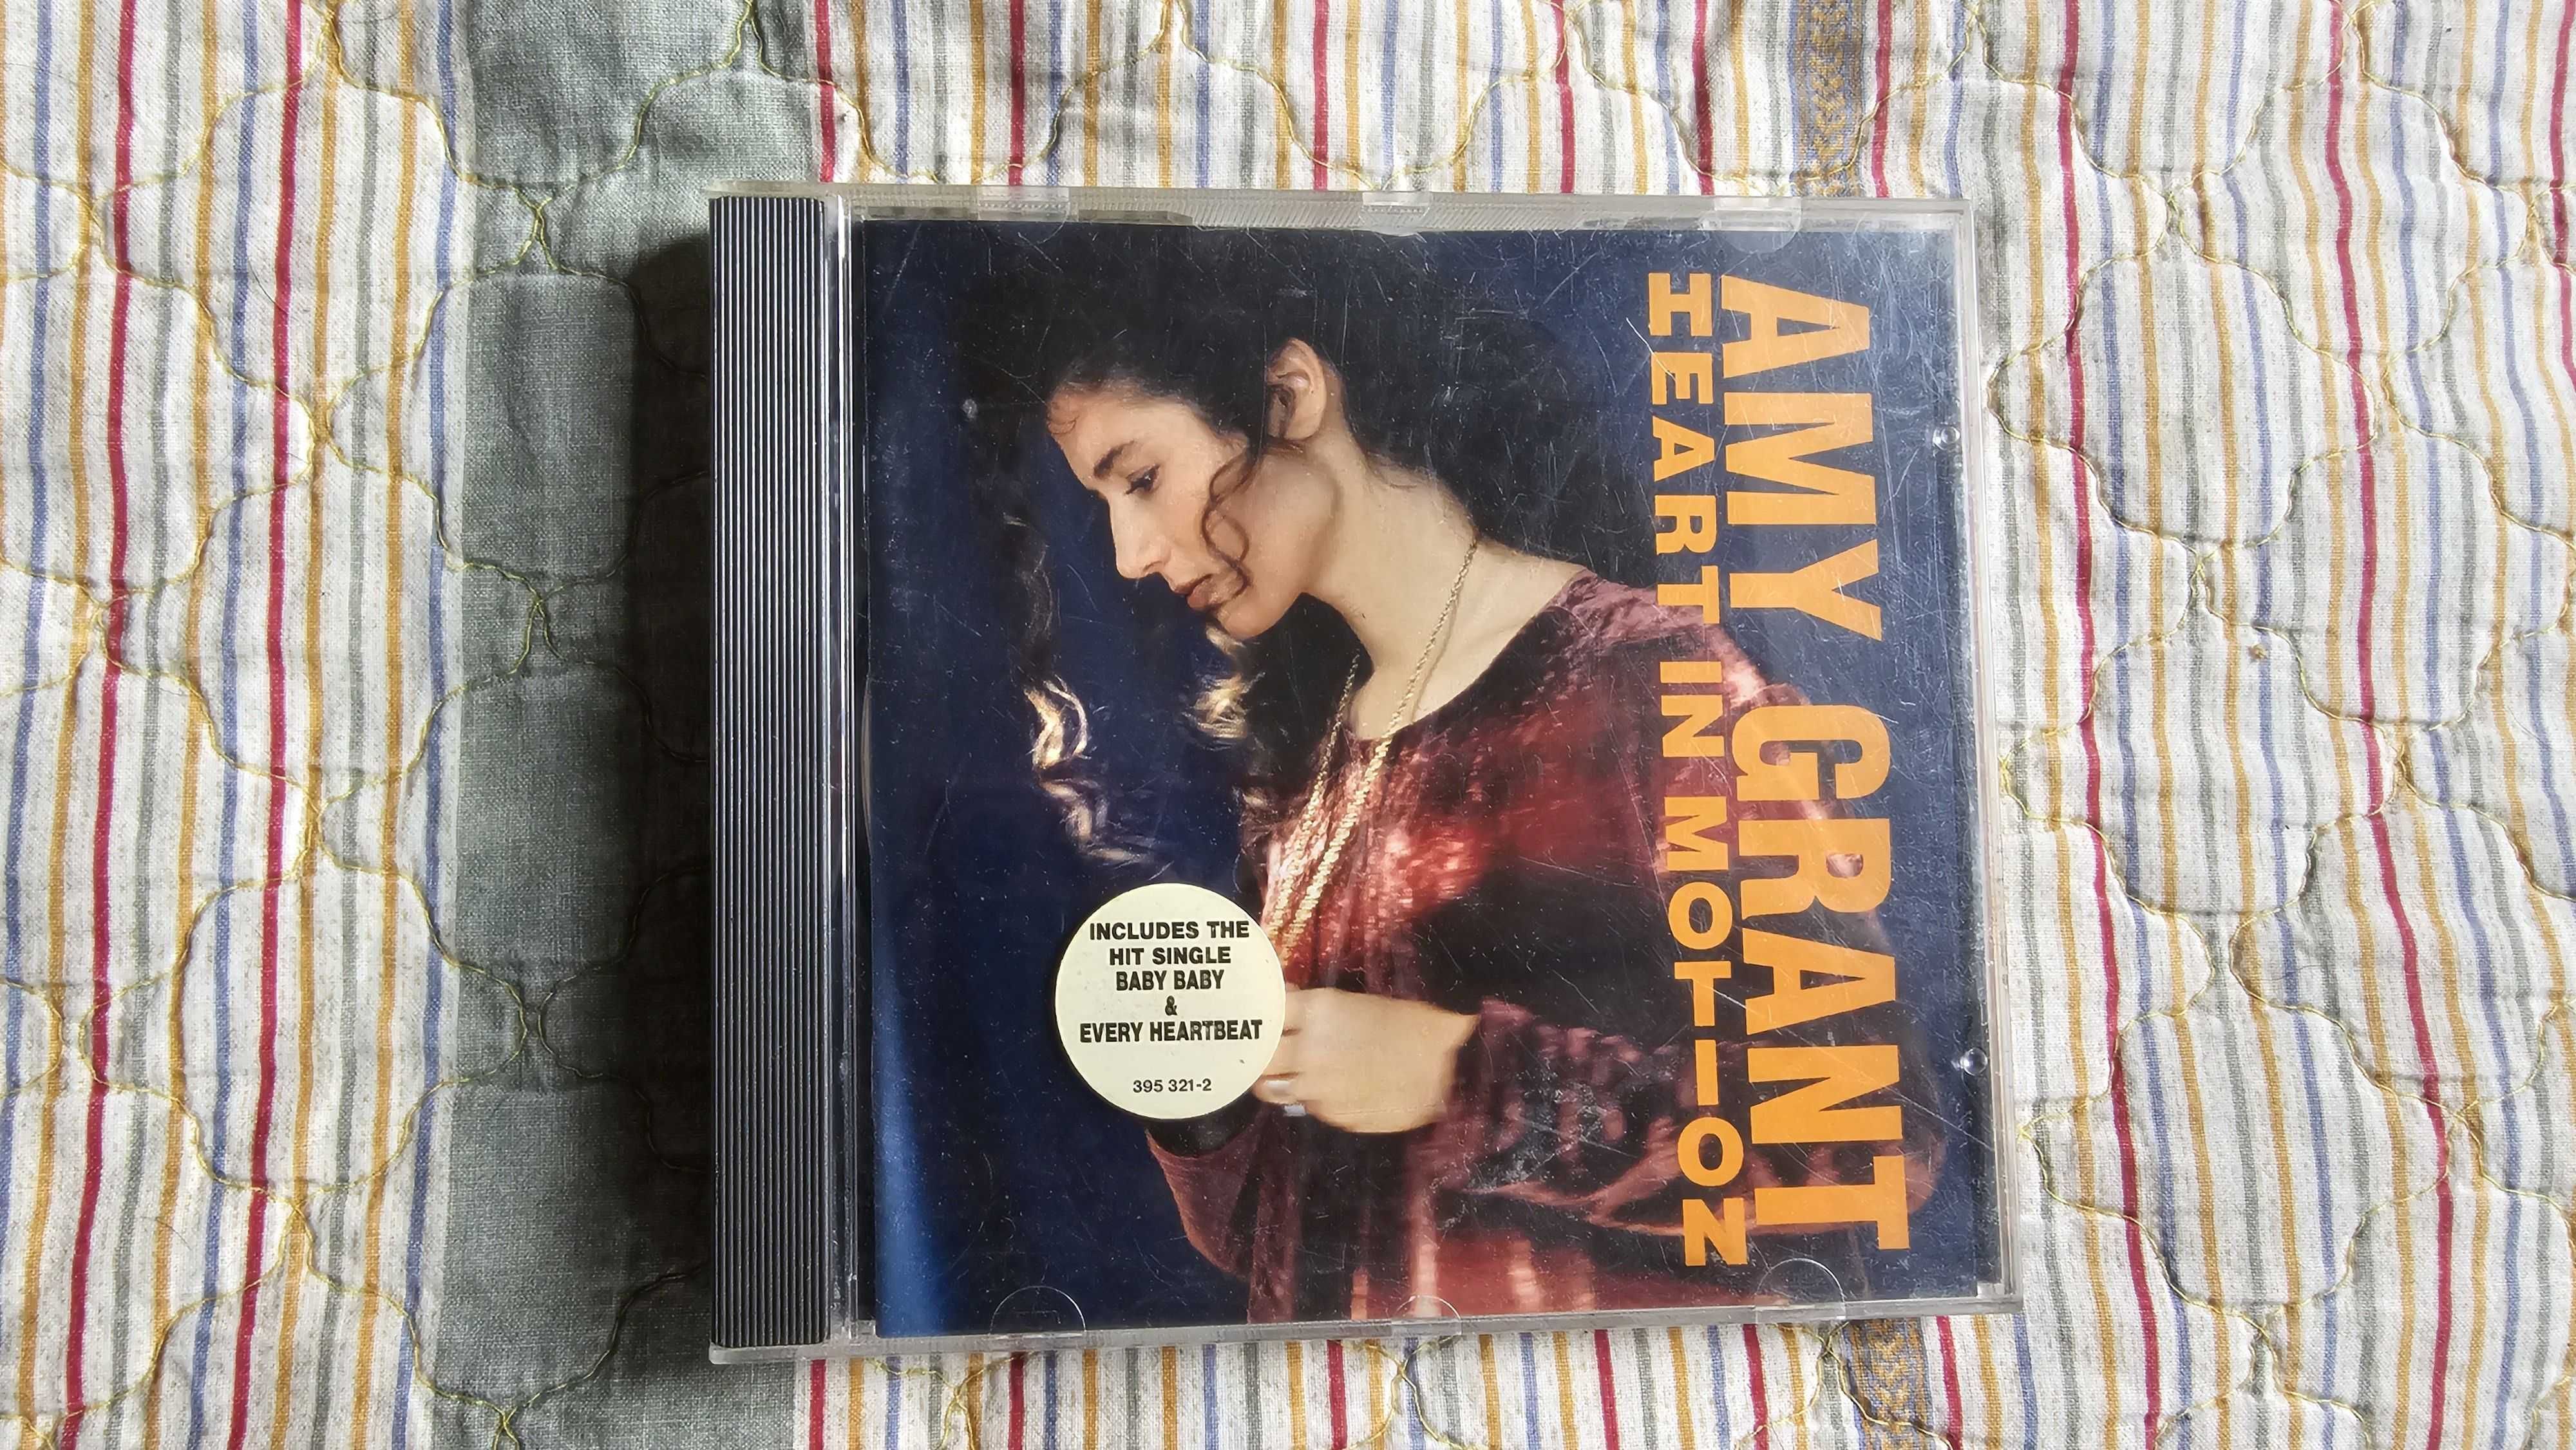 CD AMY GRANT - Heart in motion